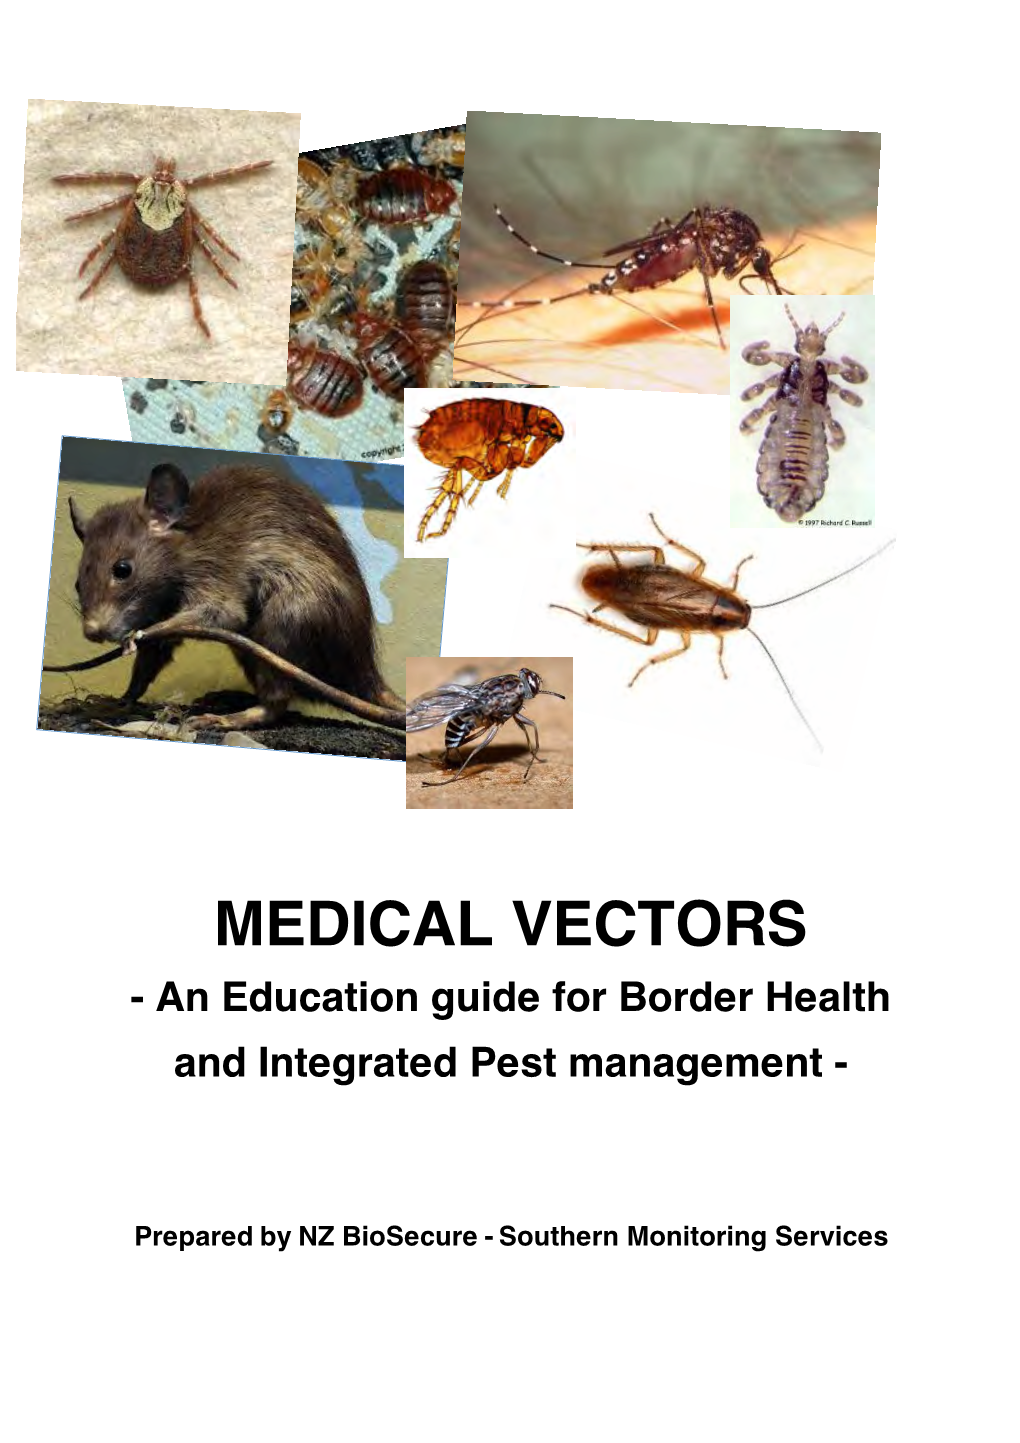 MEDICAL VECTORS - an Education Guide for Border Health and Integrated Pest Management